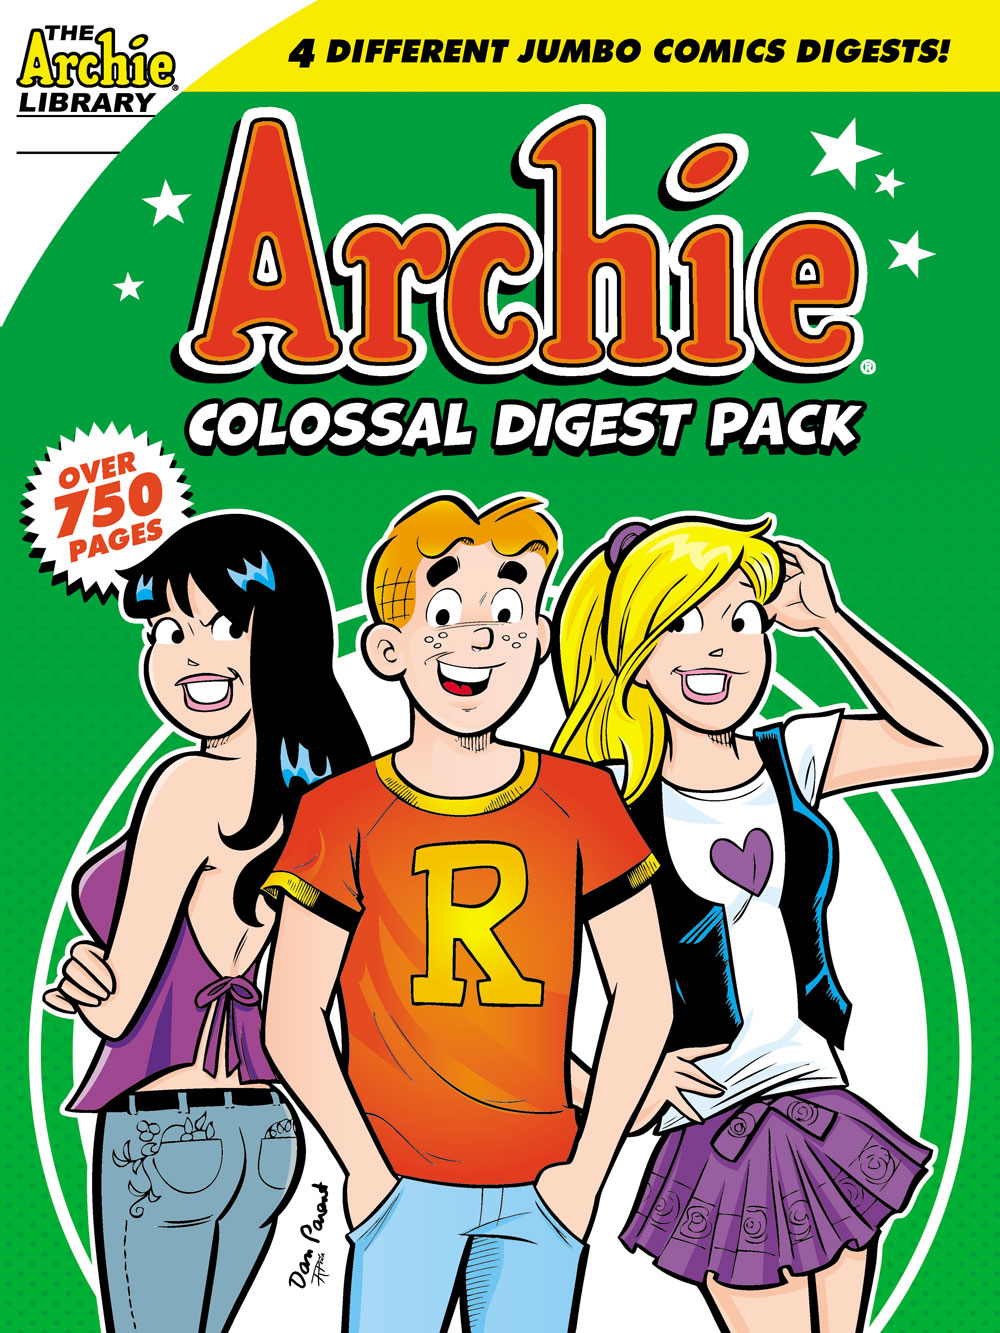 The cover of ARCHIE COLOSSAL DIGEST PACK. Betty and Veronica stand on either side of Archie smiling.